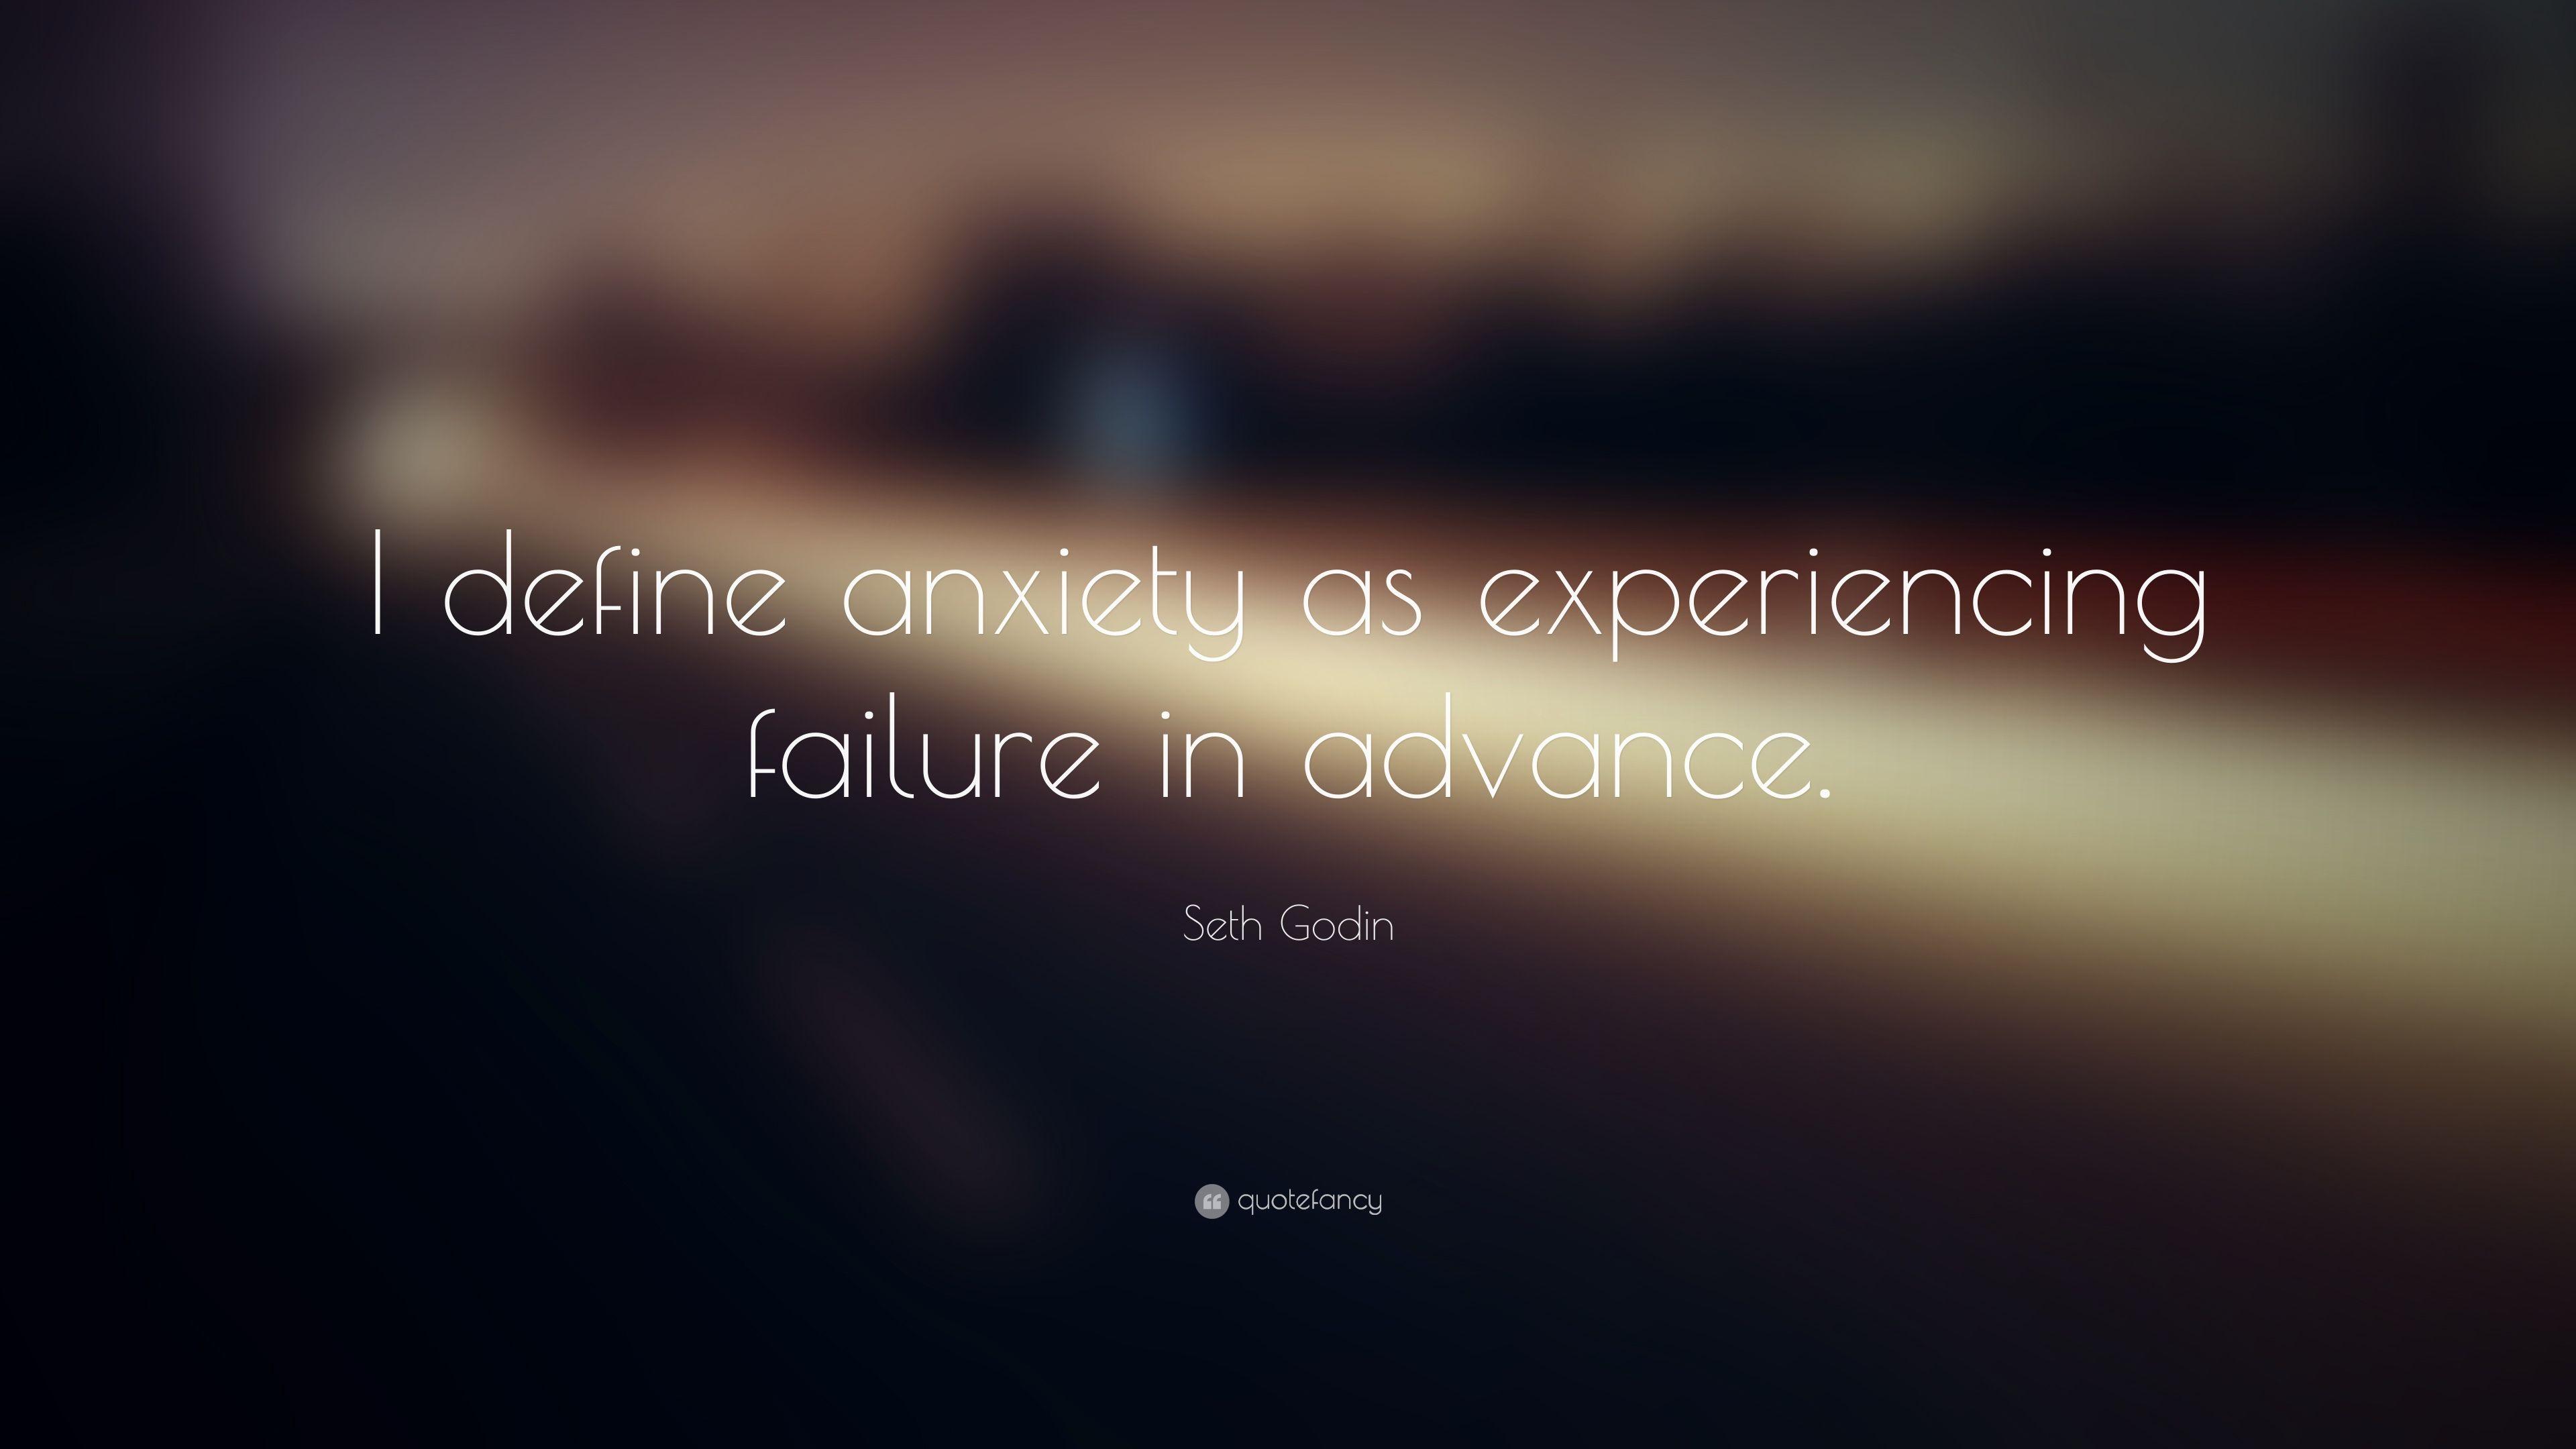 Seth Godin Quote: “I define anxiety as experiencing failure